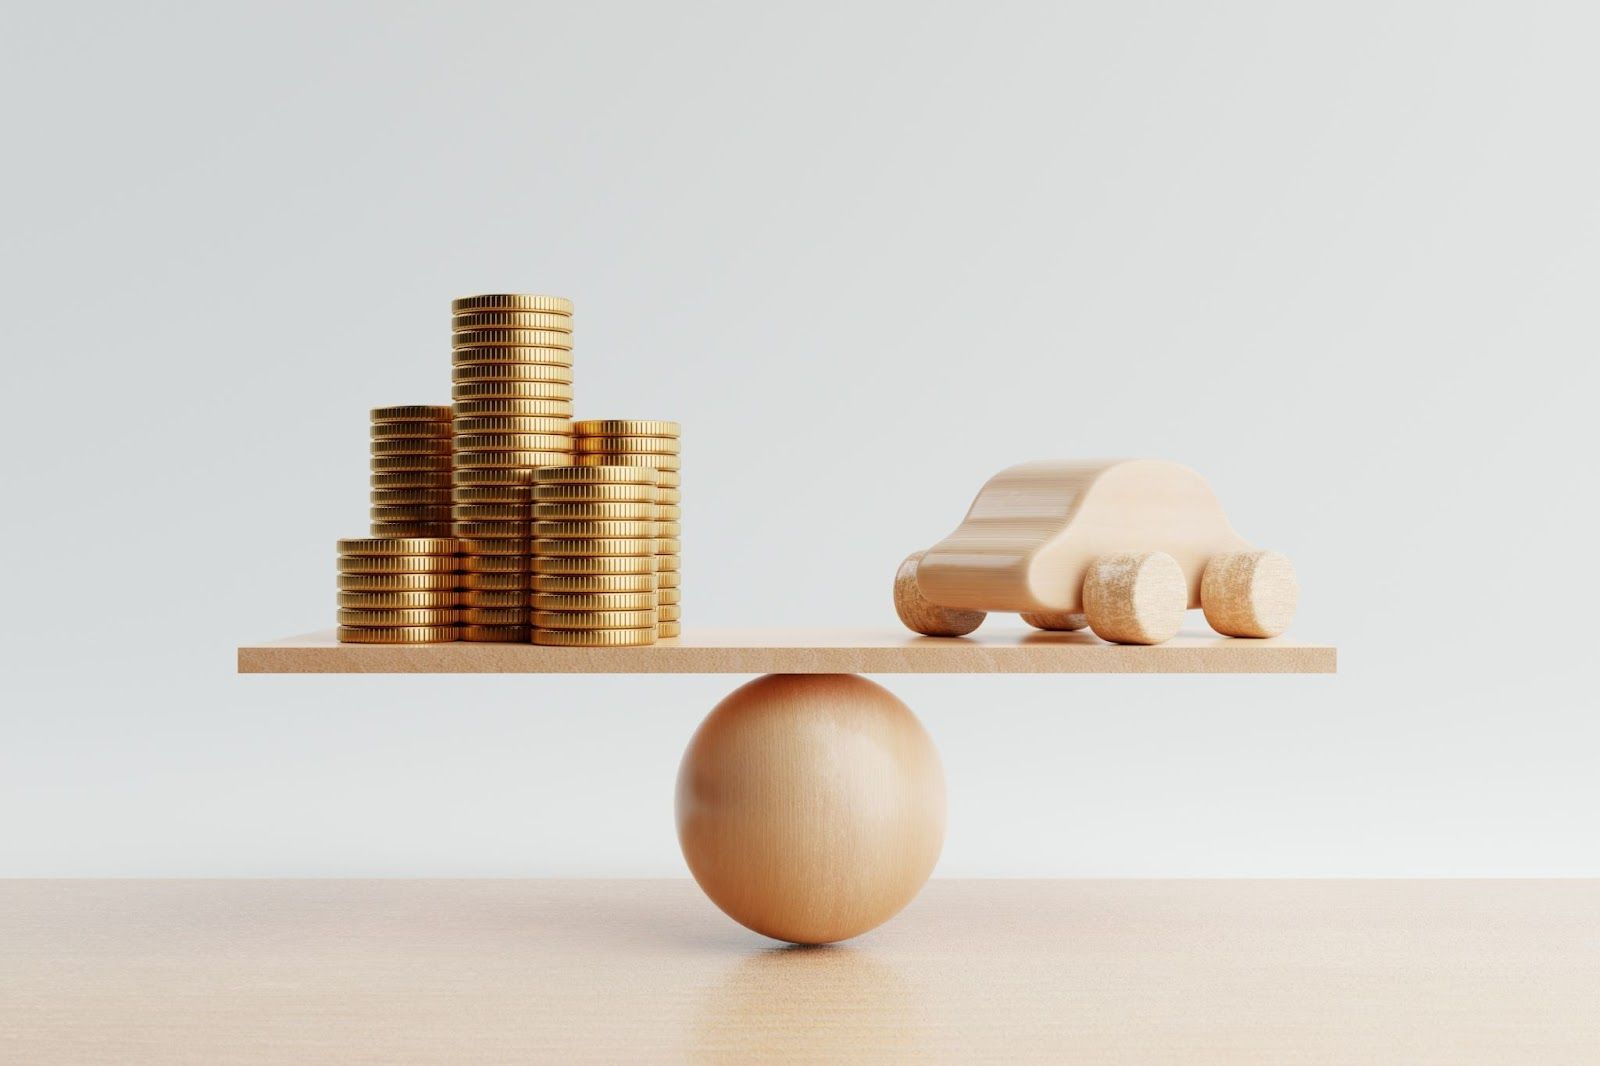 Stack of coins and wooden car balance on a wooden ball, against a white background